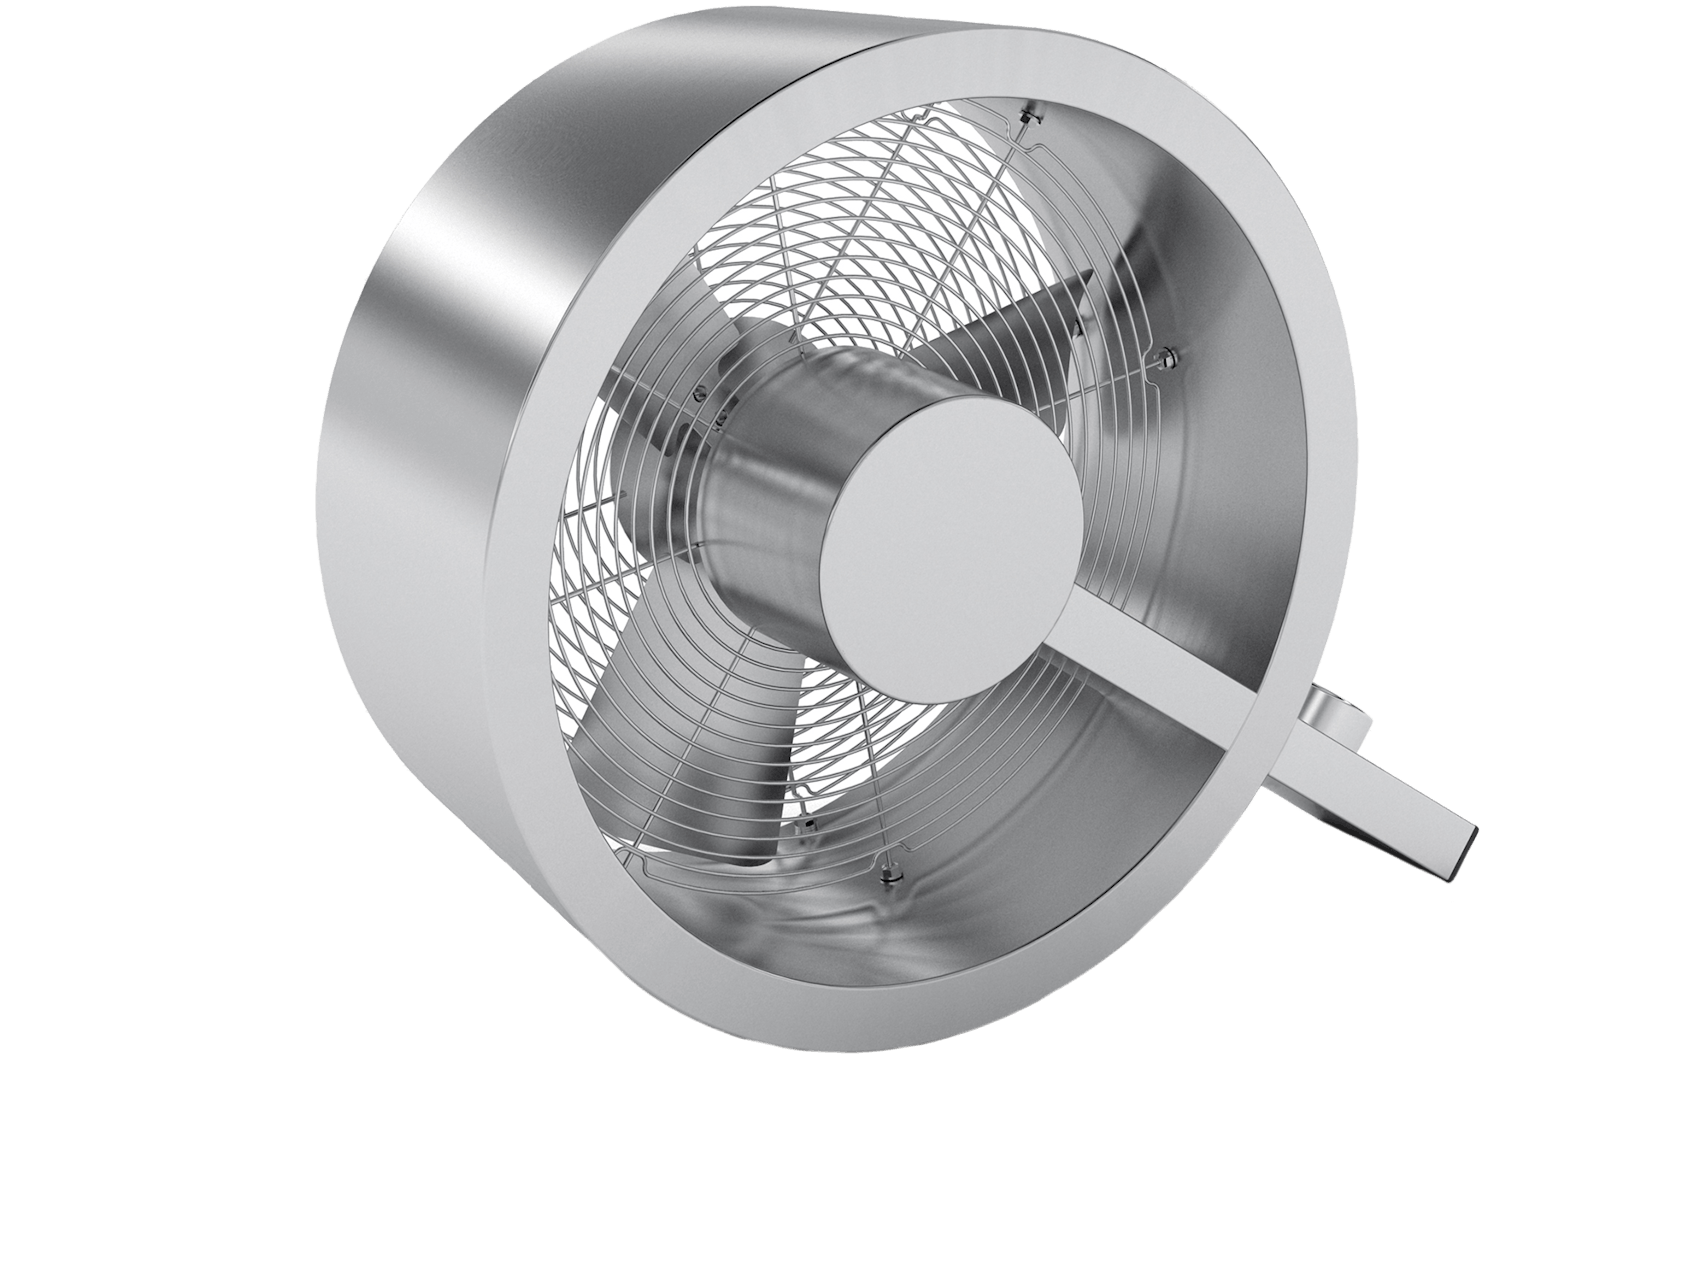 Q design fan by Stadler Form as perspective view